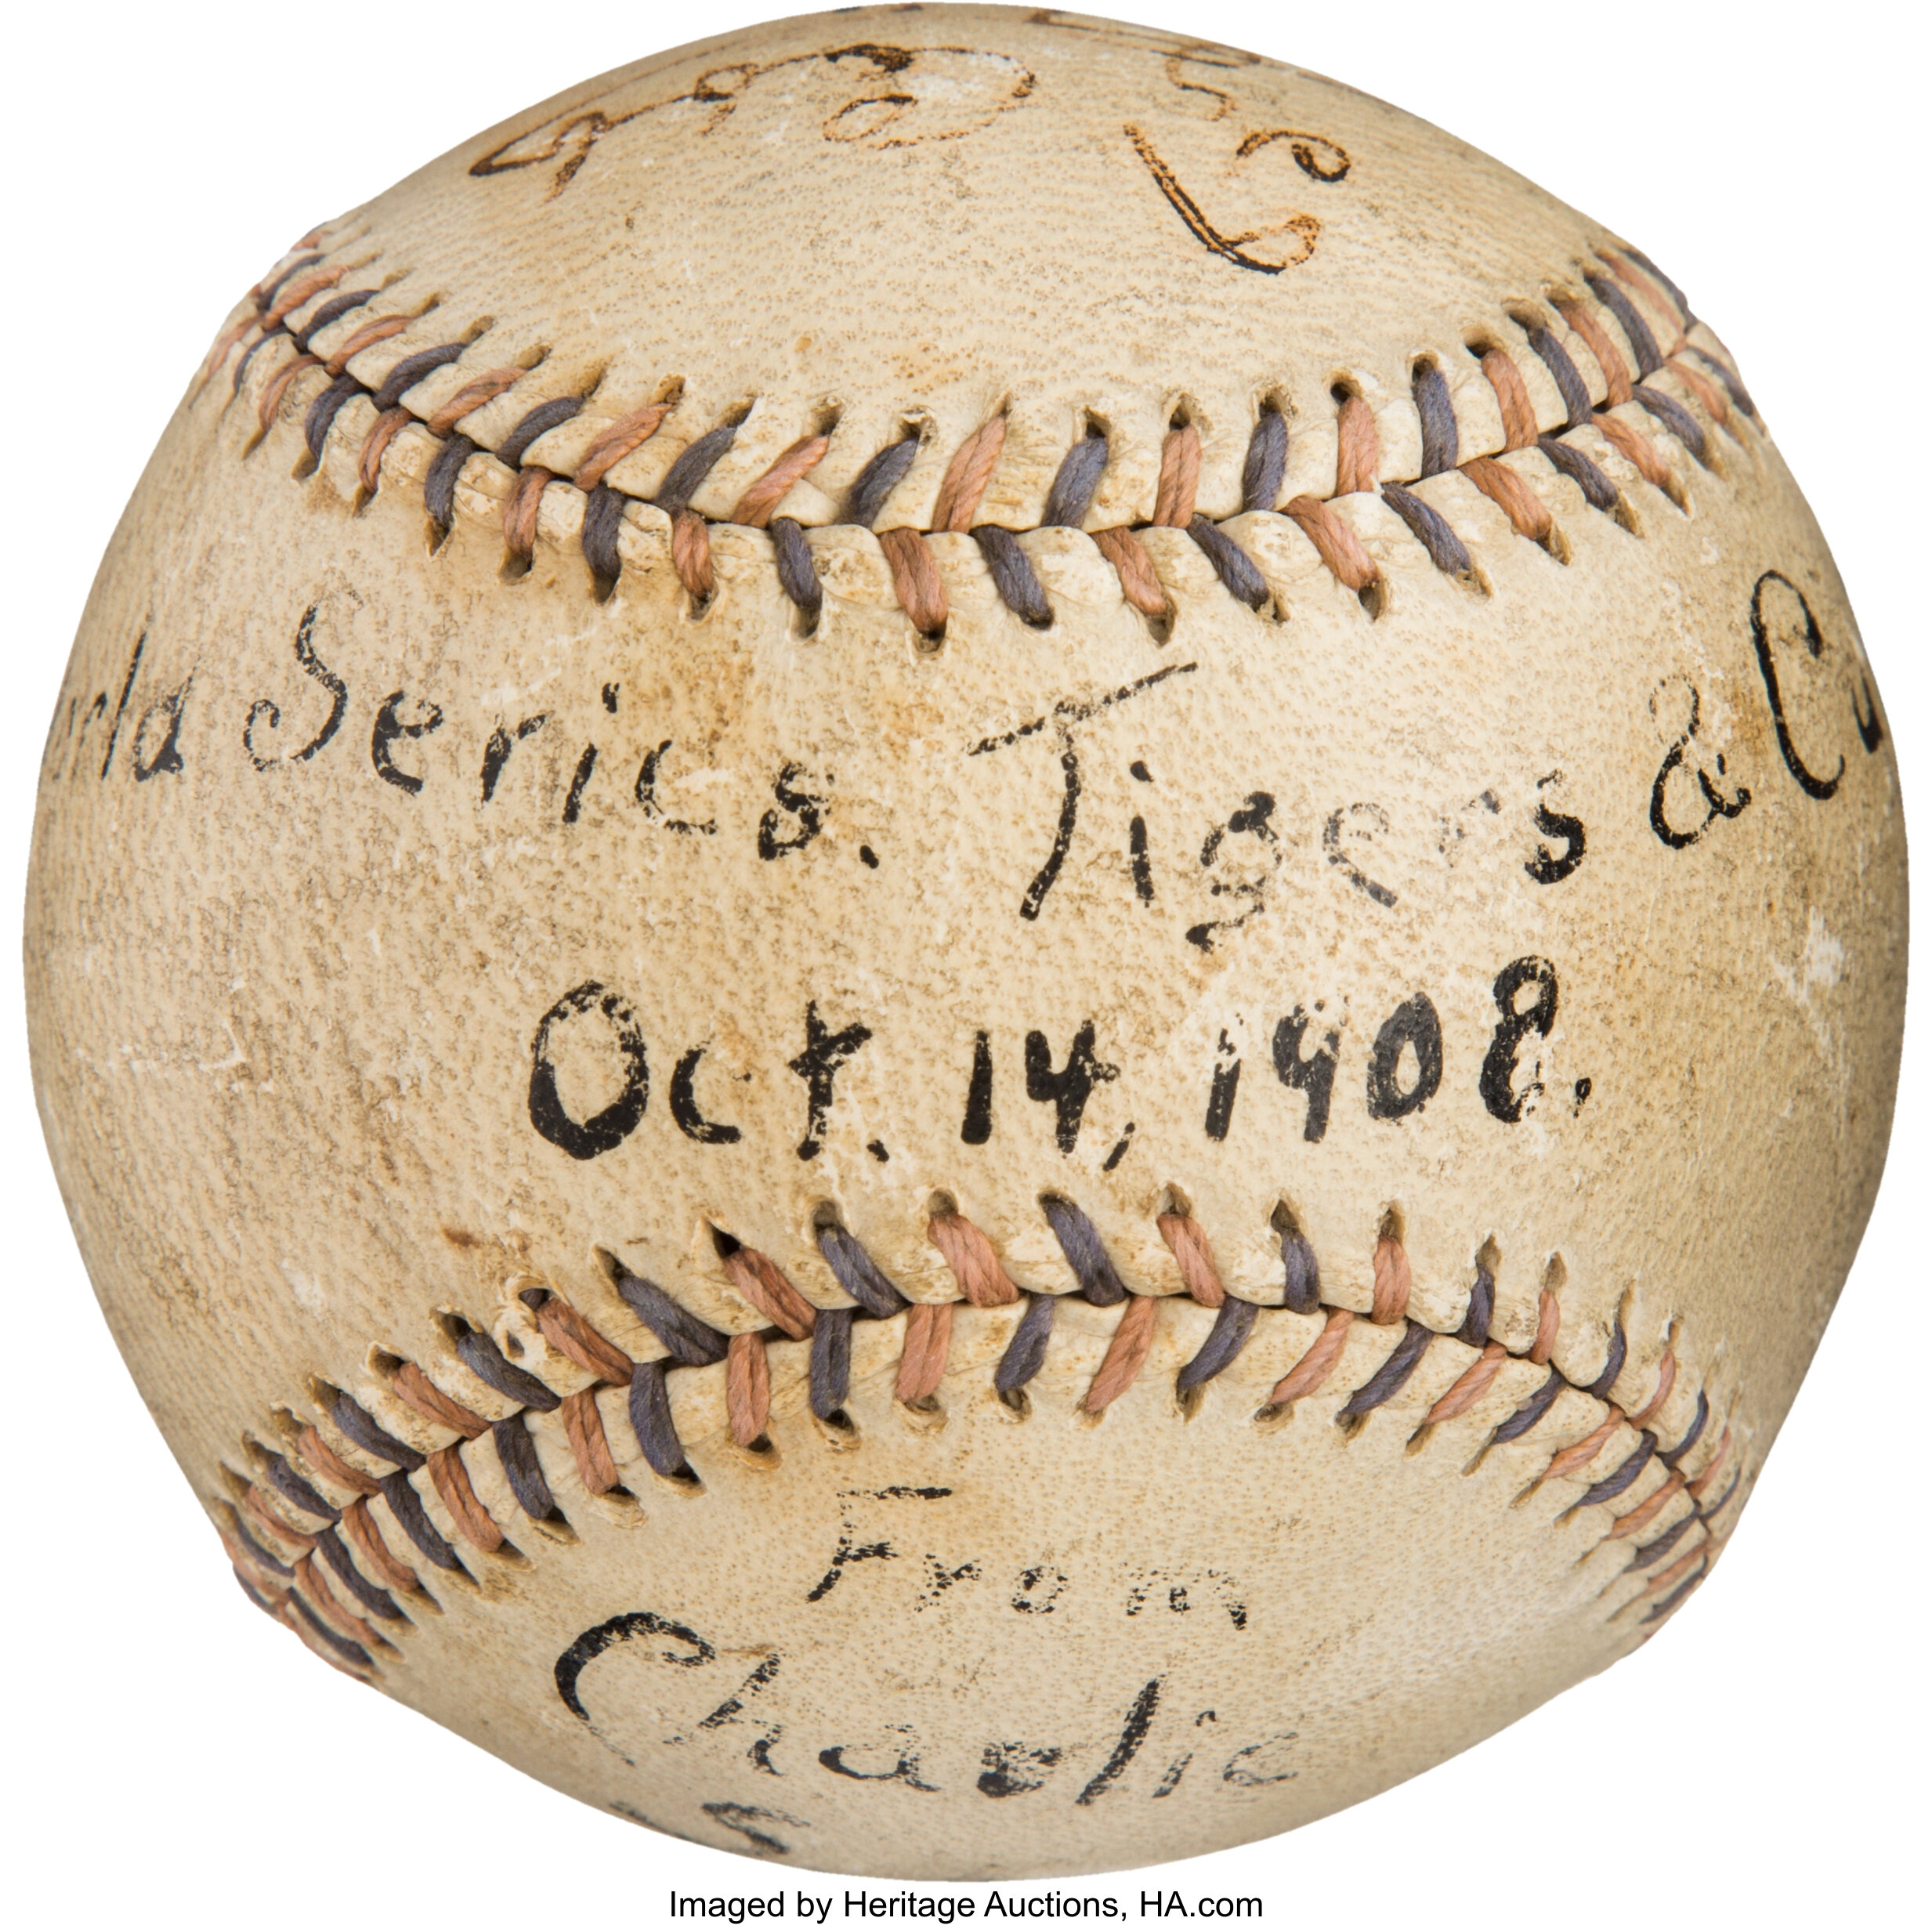 Baseball Hall of Fame sorely lacking artifacts from Cubs' World